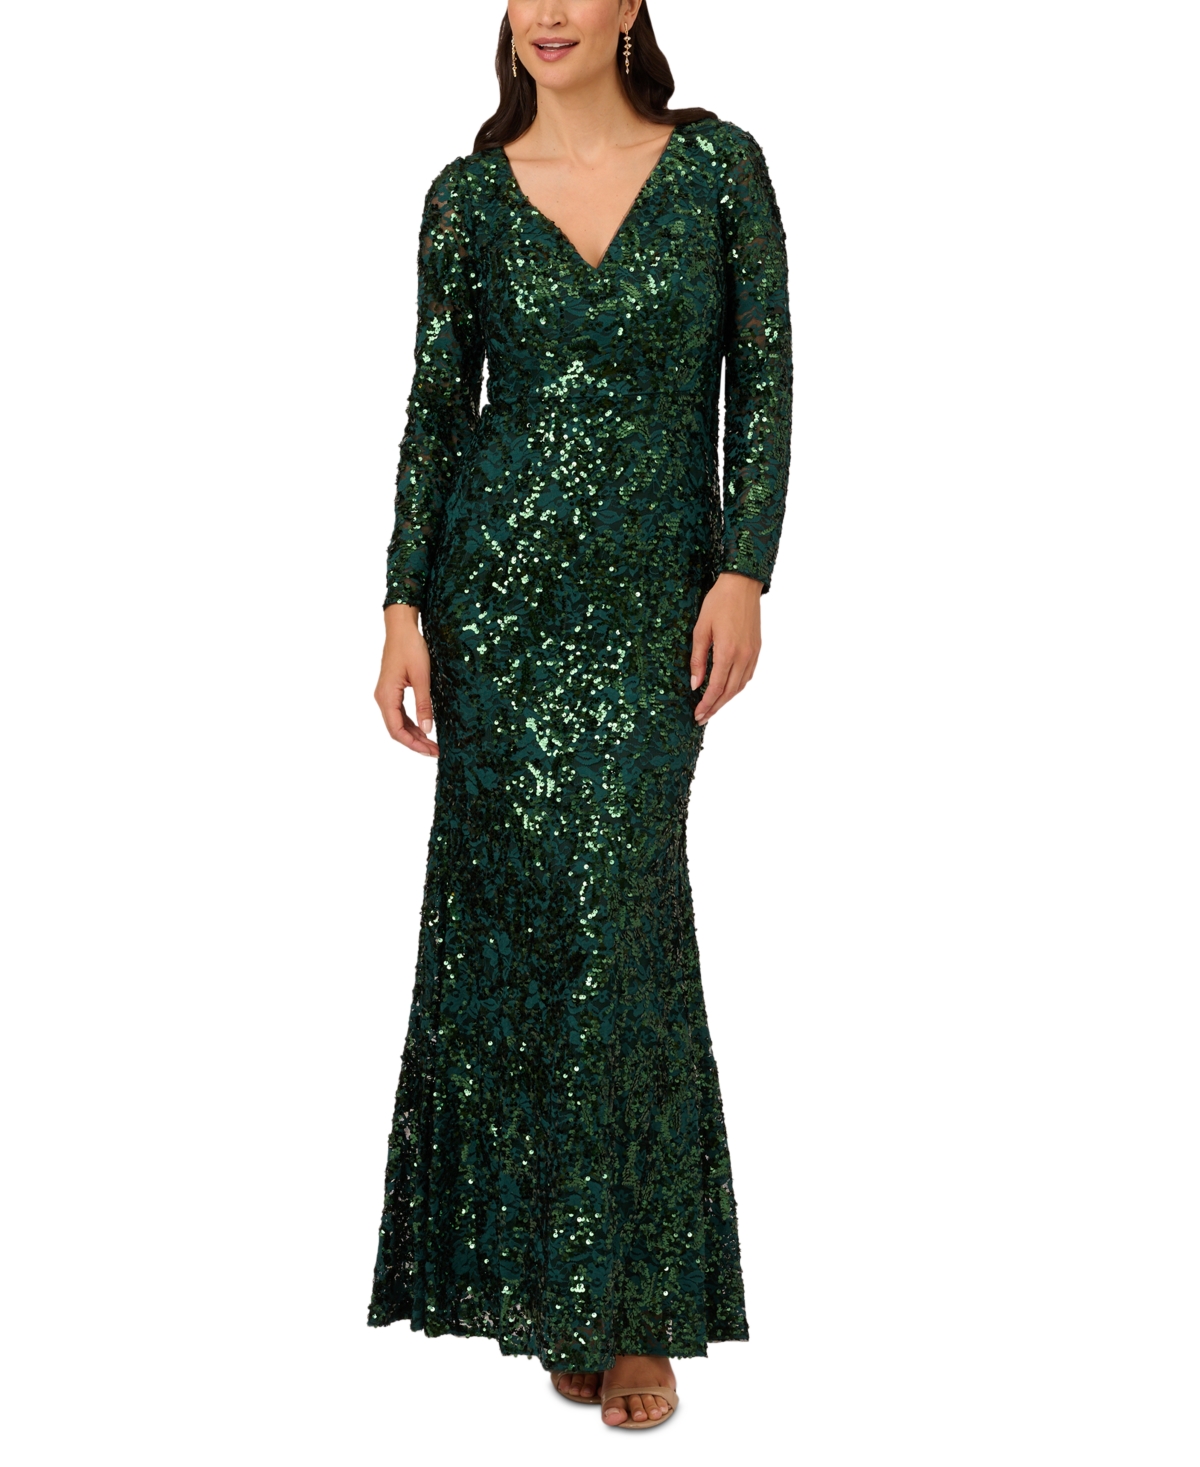 Women’s Sequined Lace V-Neck Gown Hunter